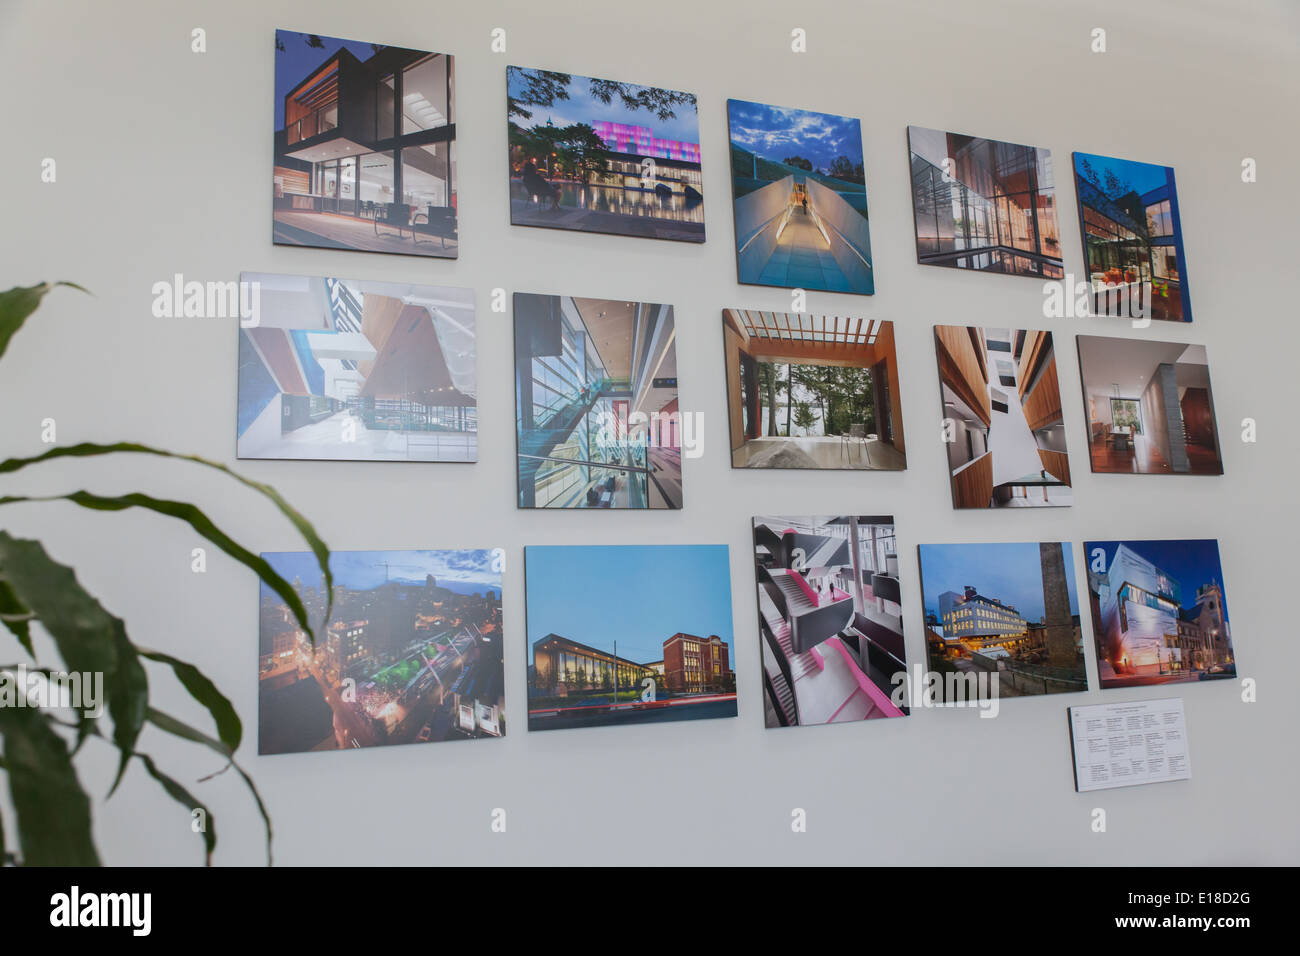 architecture picture design hanging wall Stock Photo